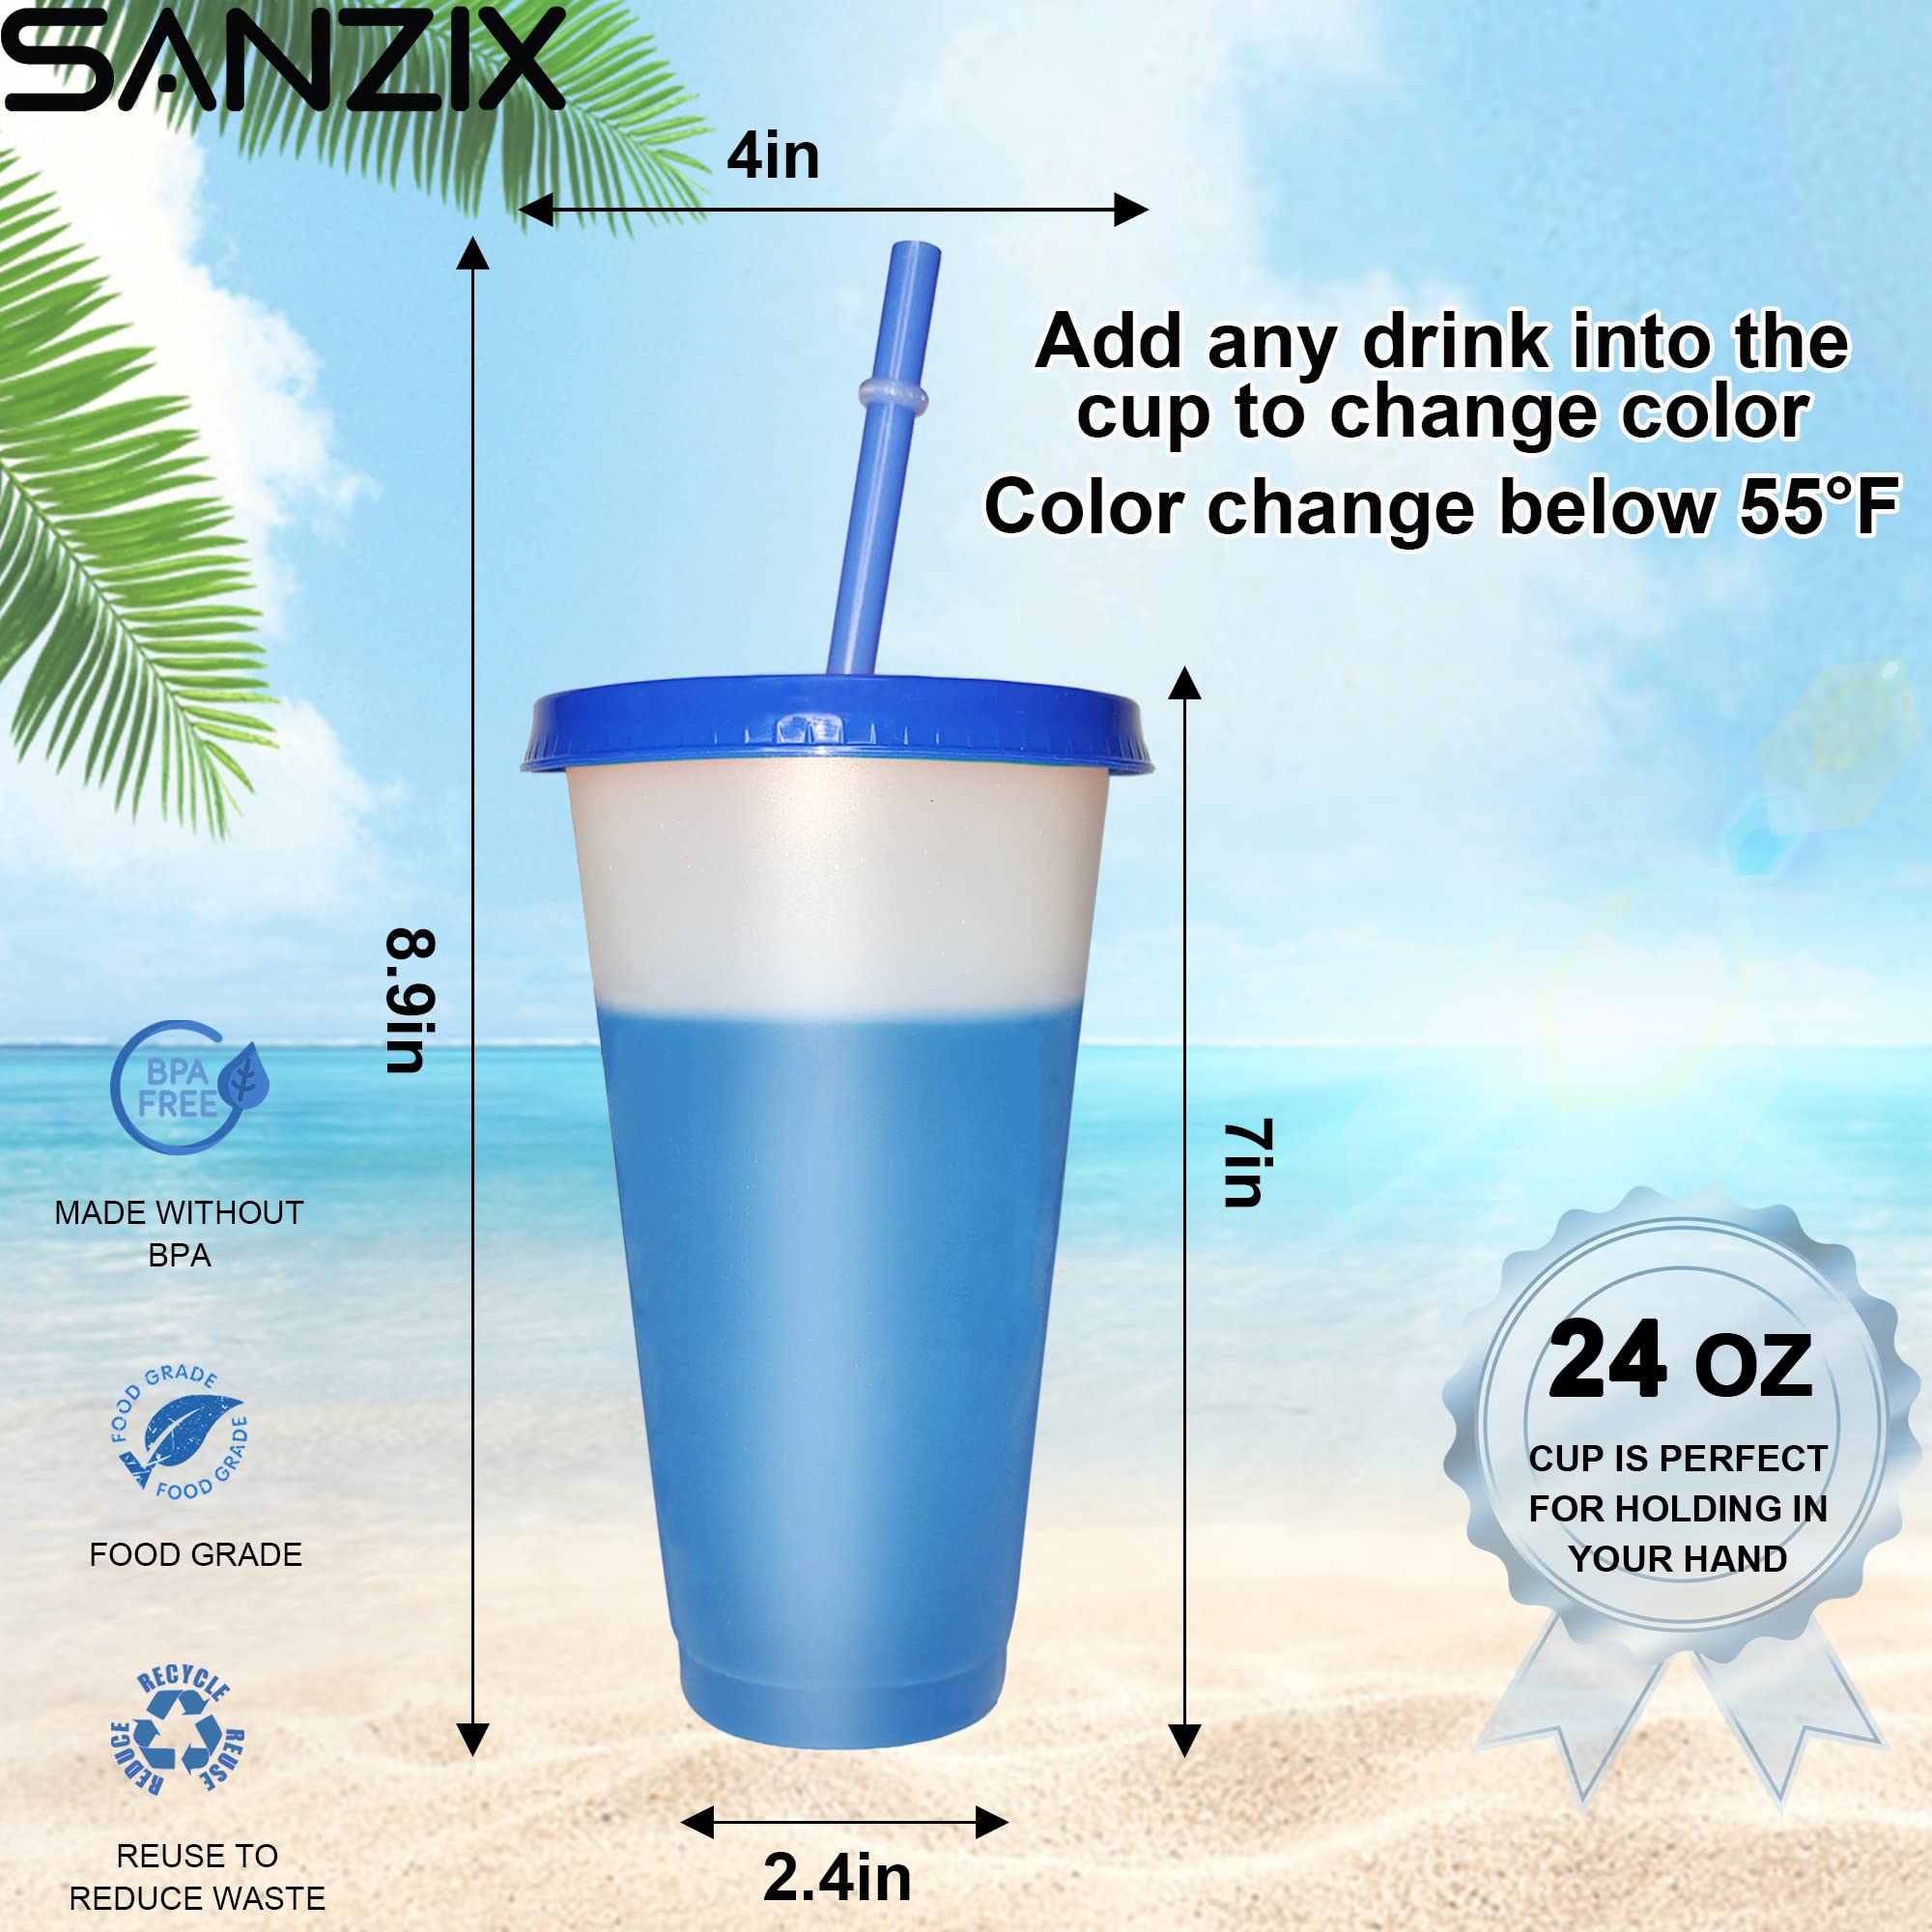 Sanzix Tumblers with Lids and Straws - 6 Pack 24oz Color Changing Cups with Lids and Straws, Reusable Cups with Lids and Straws for Party, Travel, Iced Coffee, Smoothie, Reusable Cold Drink Cups